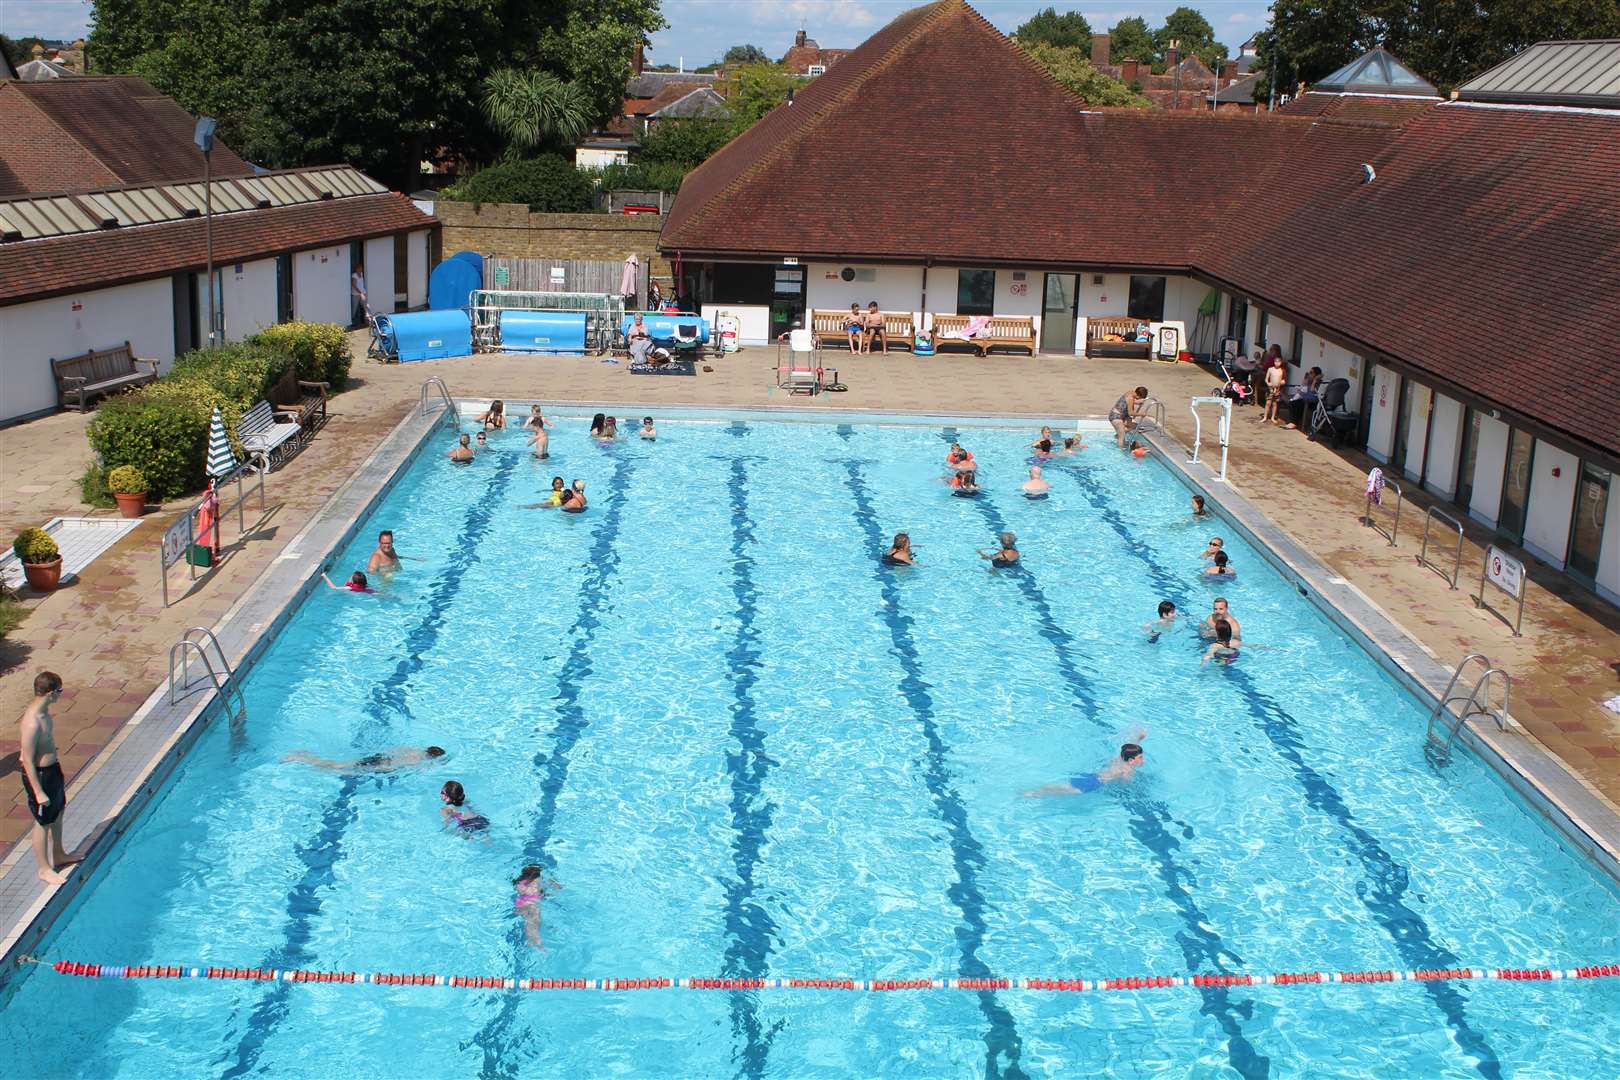 Faversham's main outdoor pool is already open. Picture: Poppy Boorman/Faversham Pools